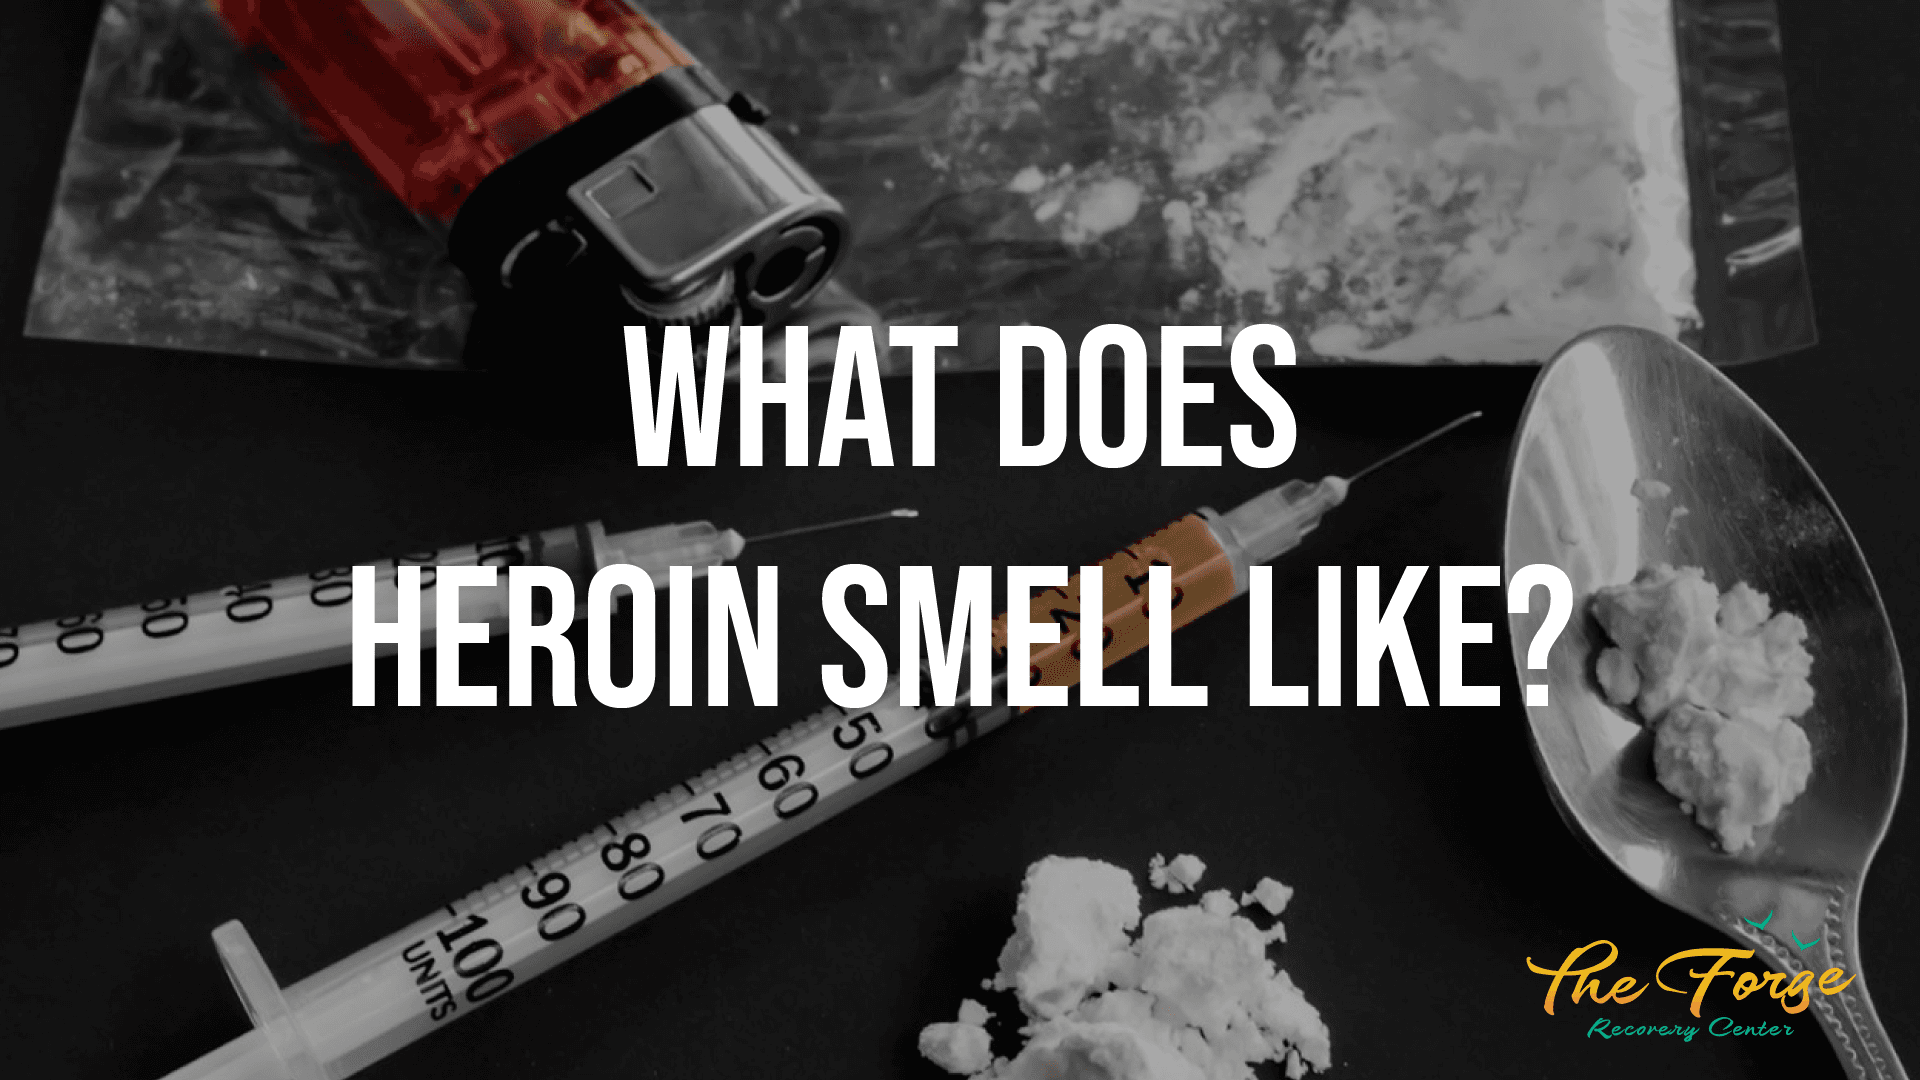 What Does Heroin Smell Like?